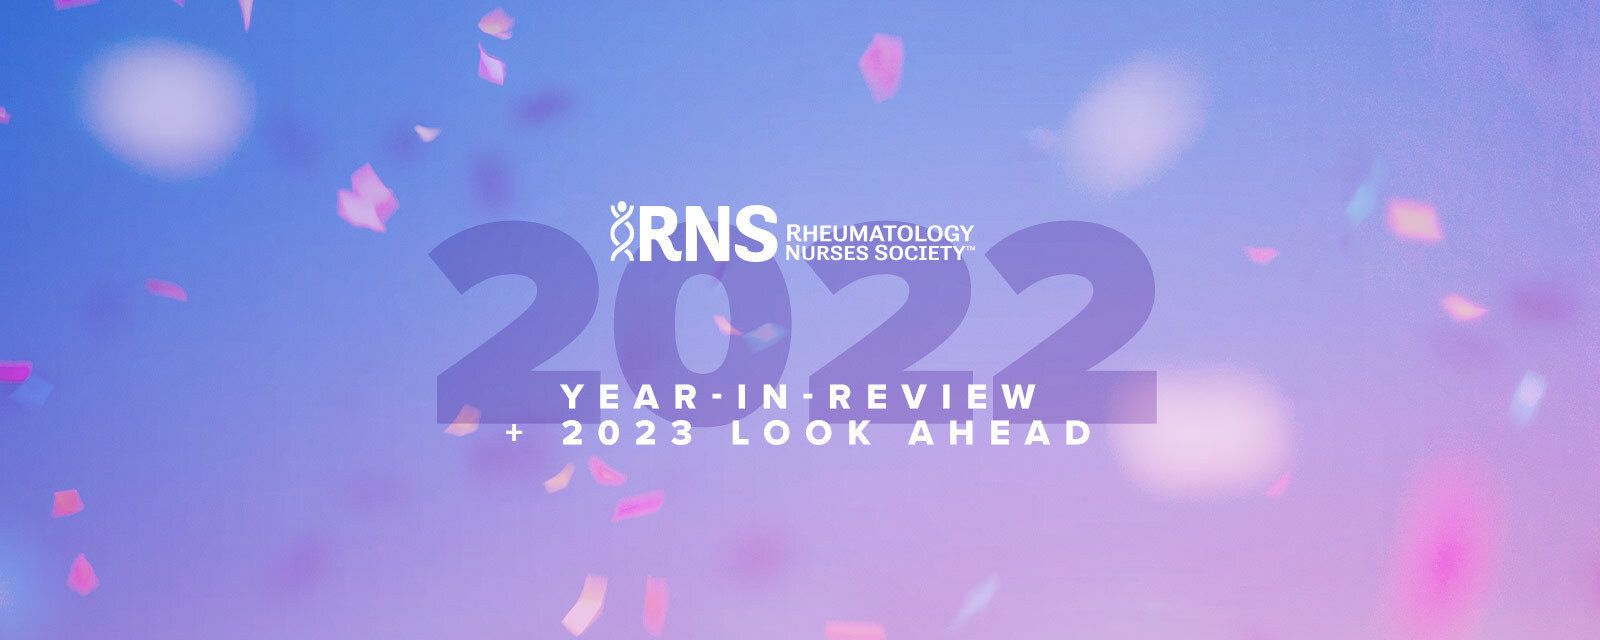 2022 Year – in – Review + 2023 Look Ahead